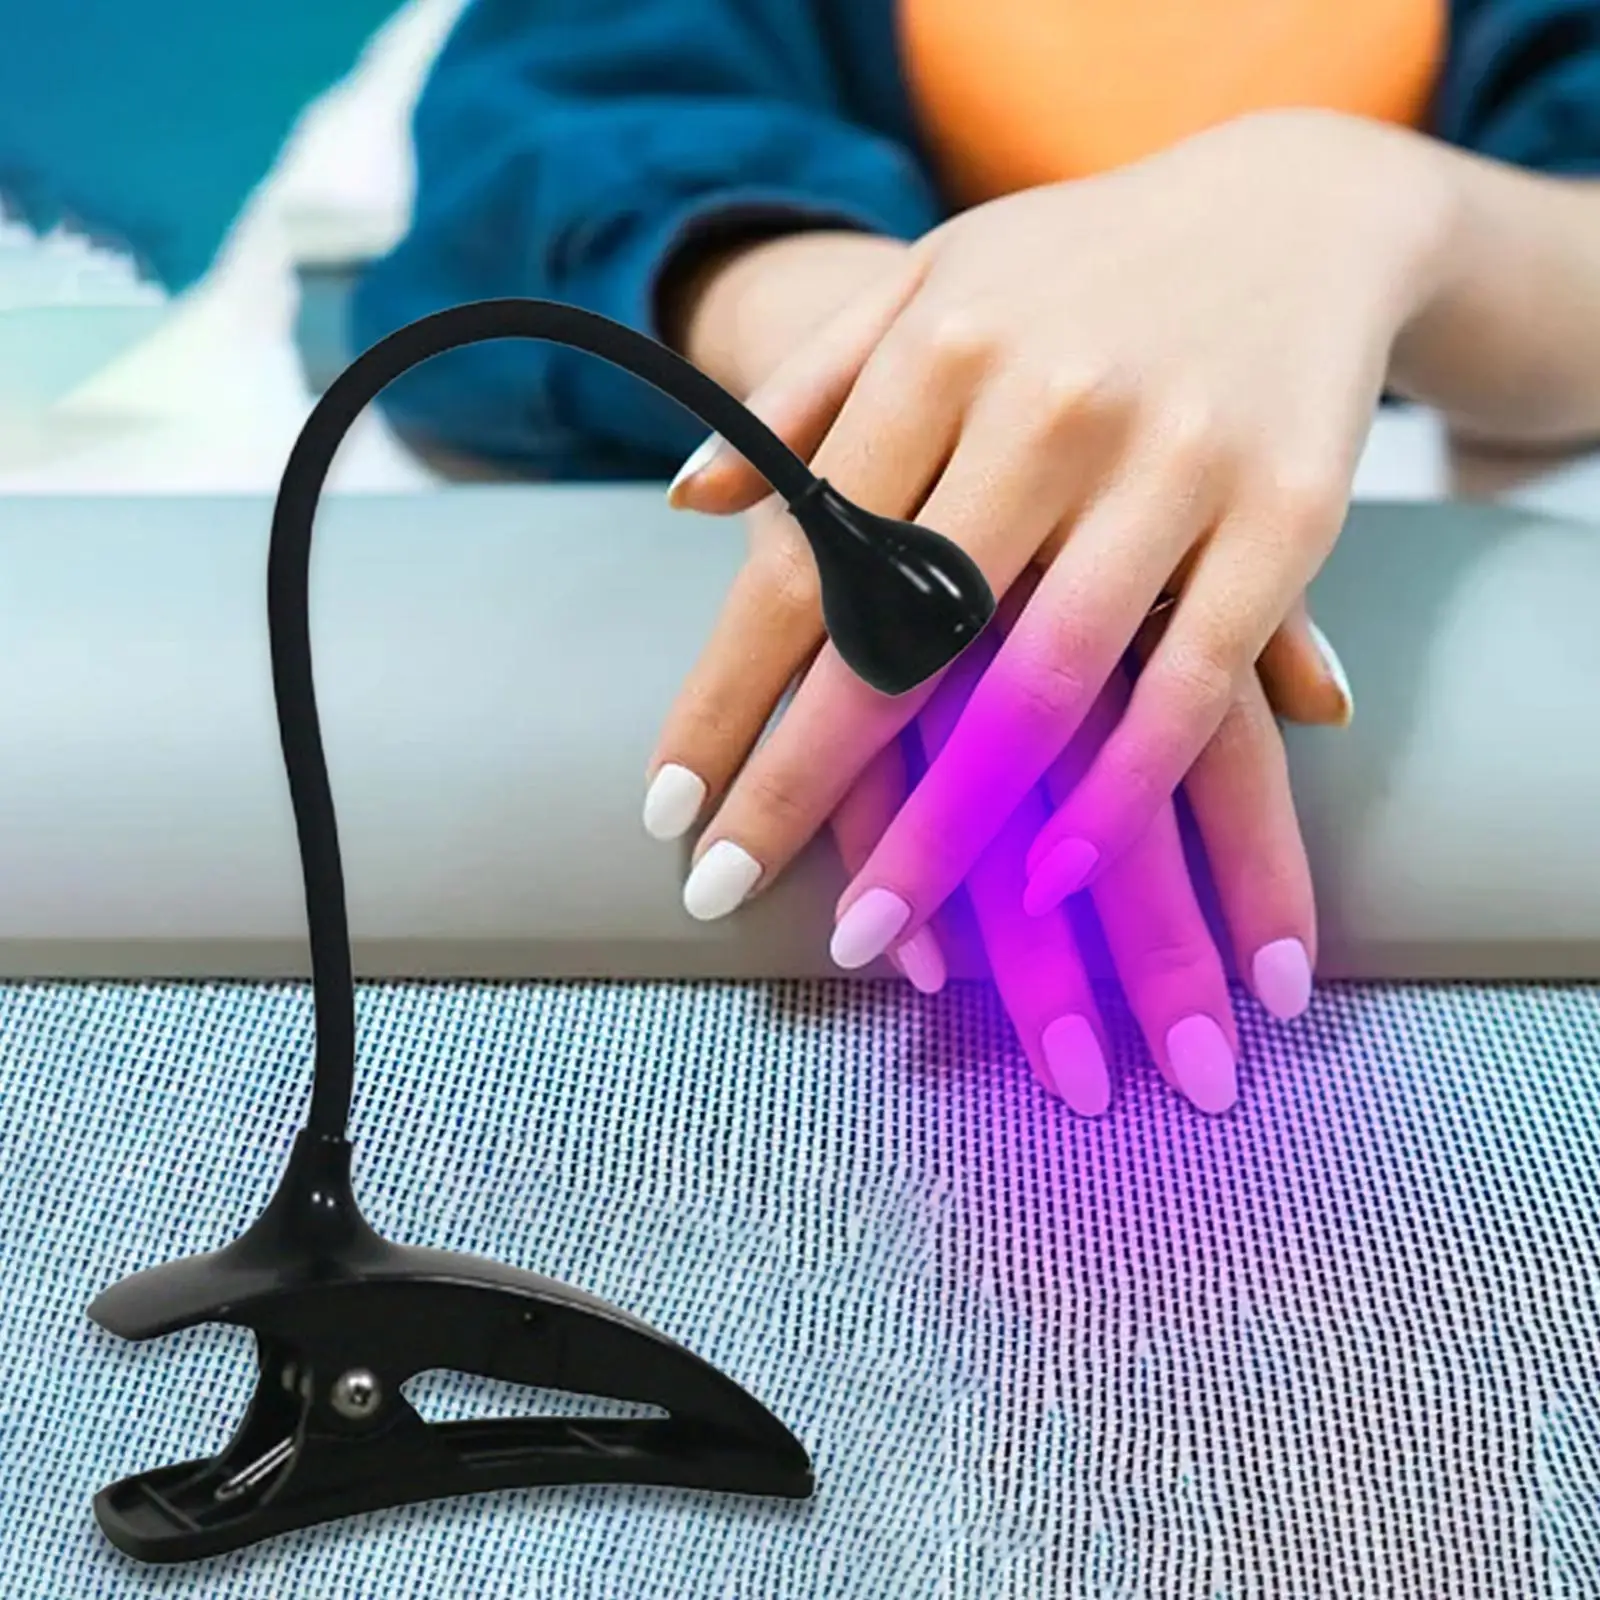 Manicure Lamp 5W 360 Degree Adjustable with Clamp Compact Professional Portable Nail Dryer Lamp Nail Lamp for Single Finger